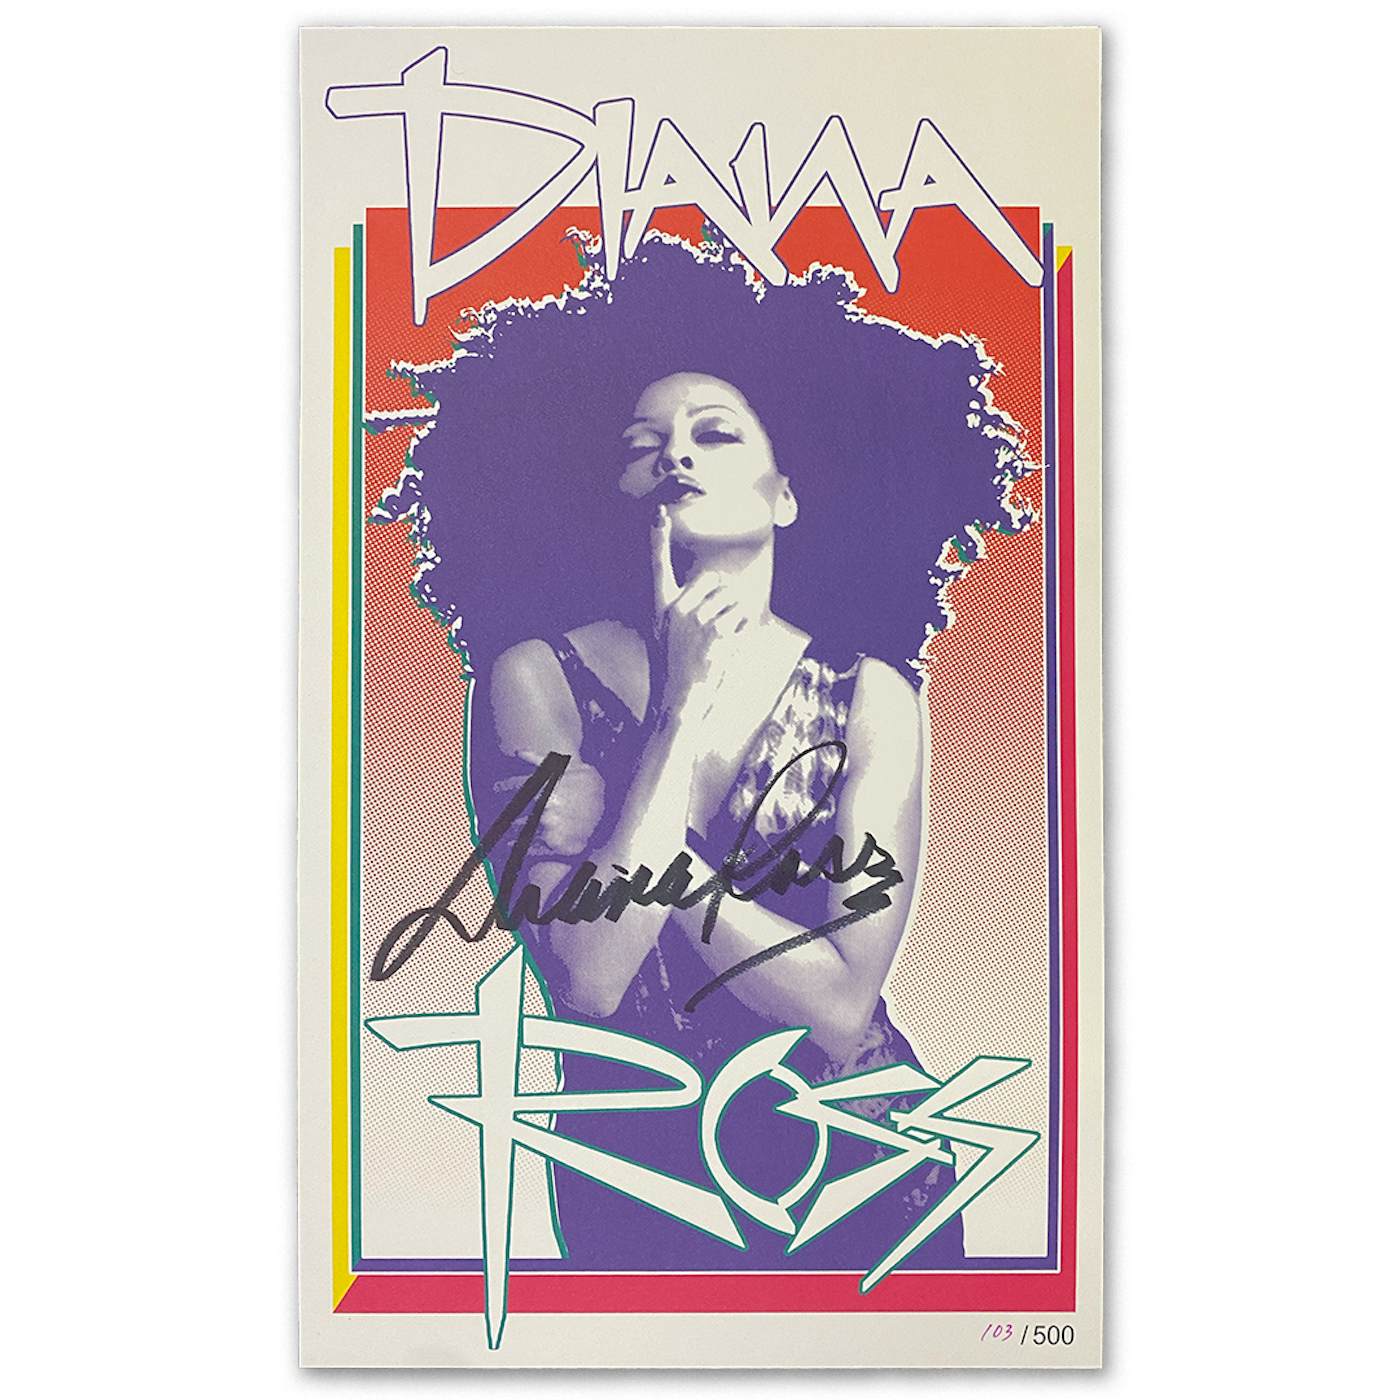 Diana Ross "Cover Page" AUTOGRAPHED Limited Edition Poster